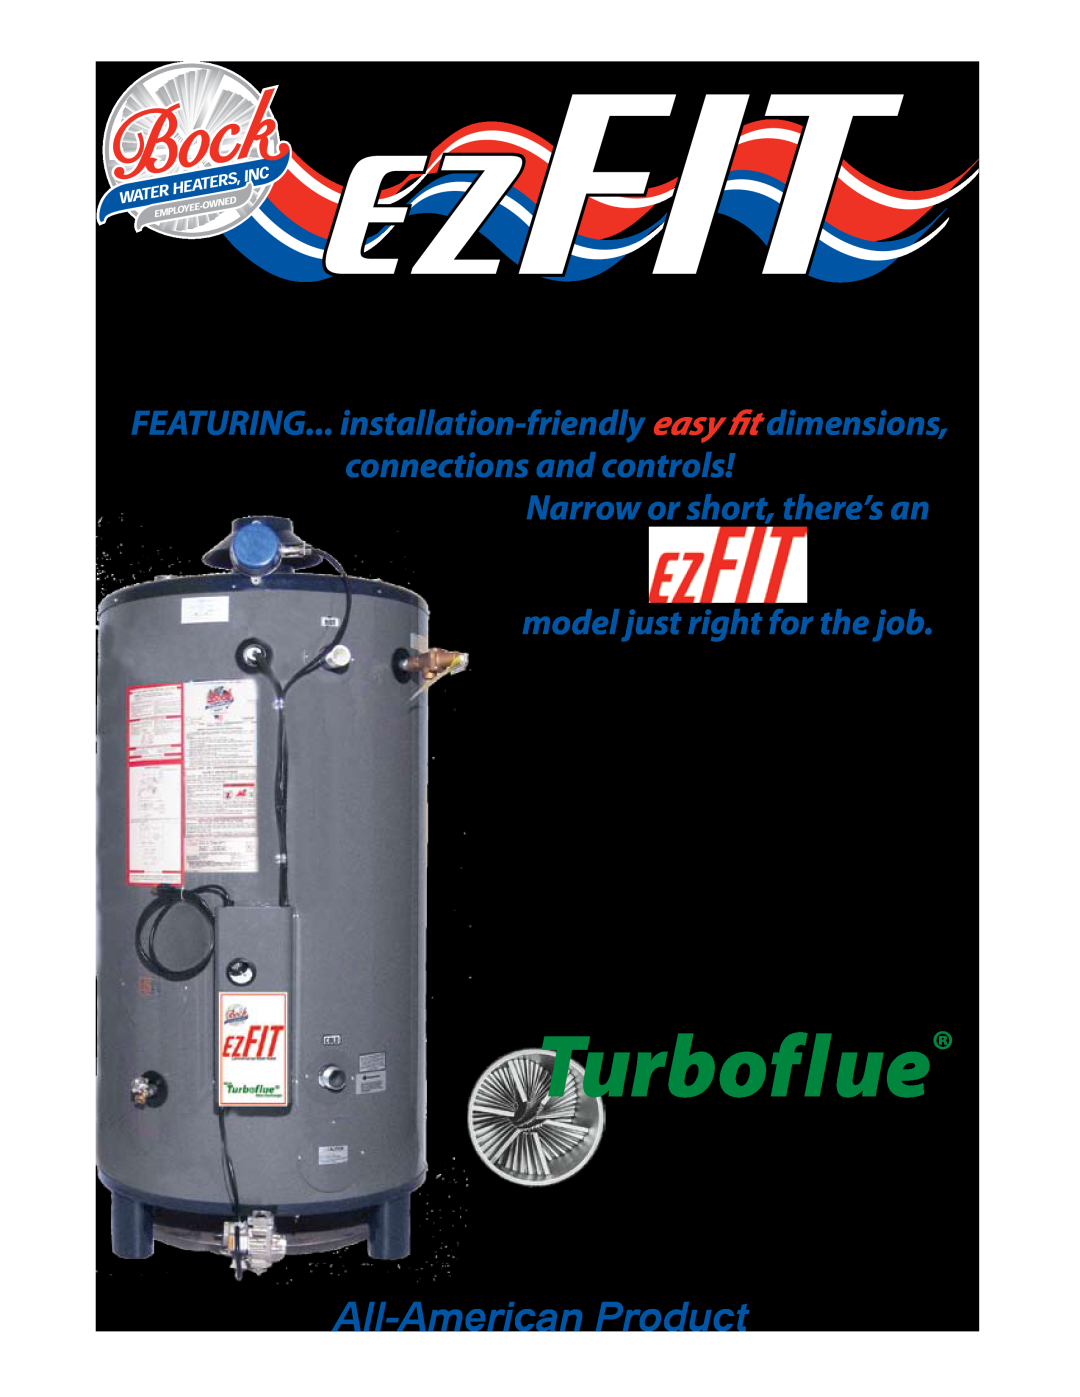 Bock Water heaters EZFIT dimensions ezFIT, Turboflue, All-American Product, Commercial Atmospheric Gas Water Heaters 